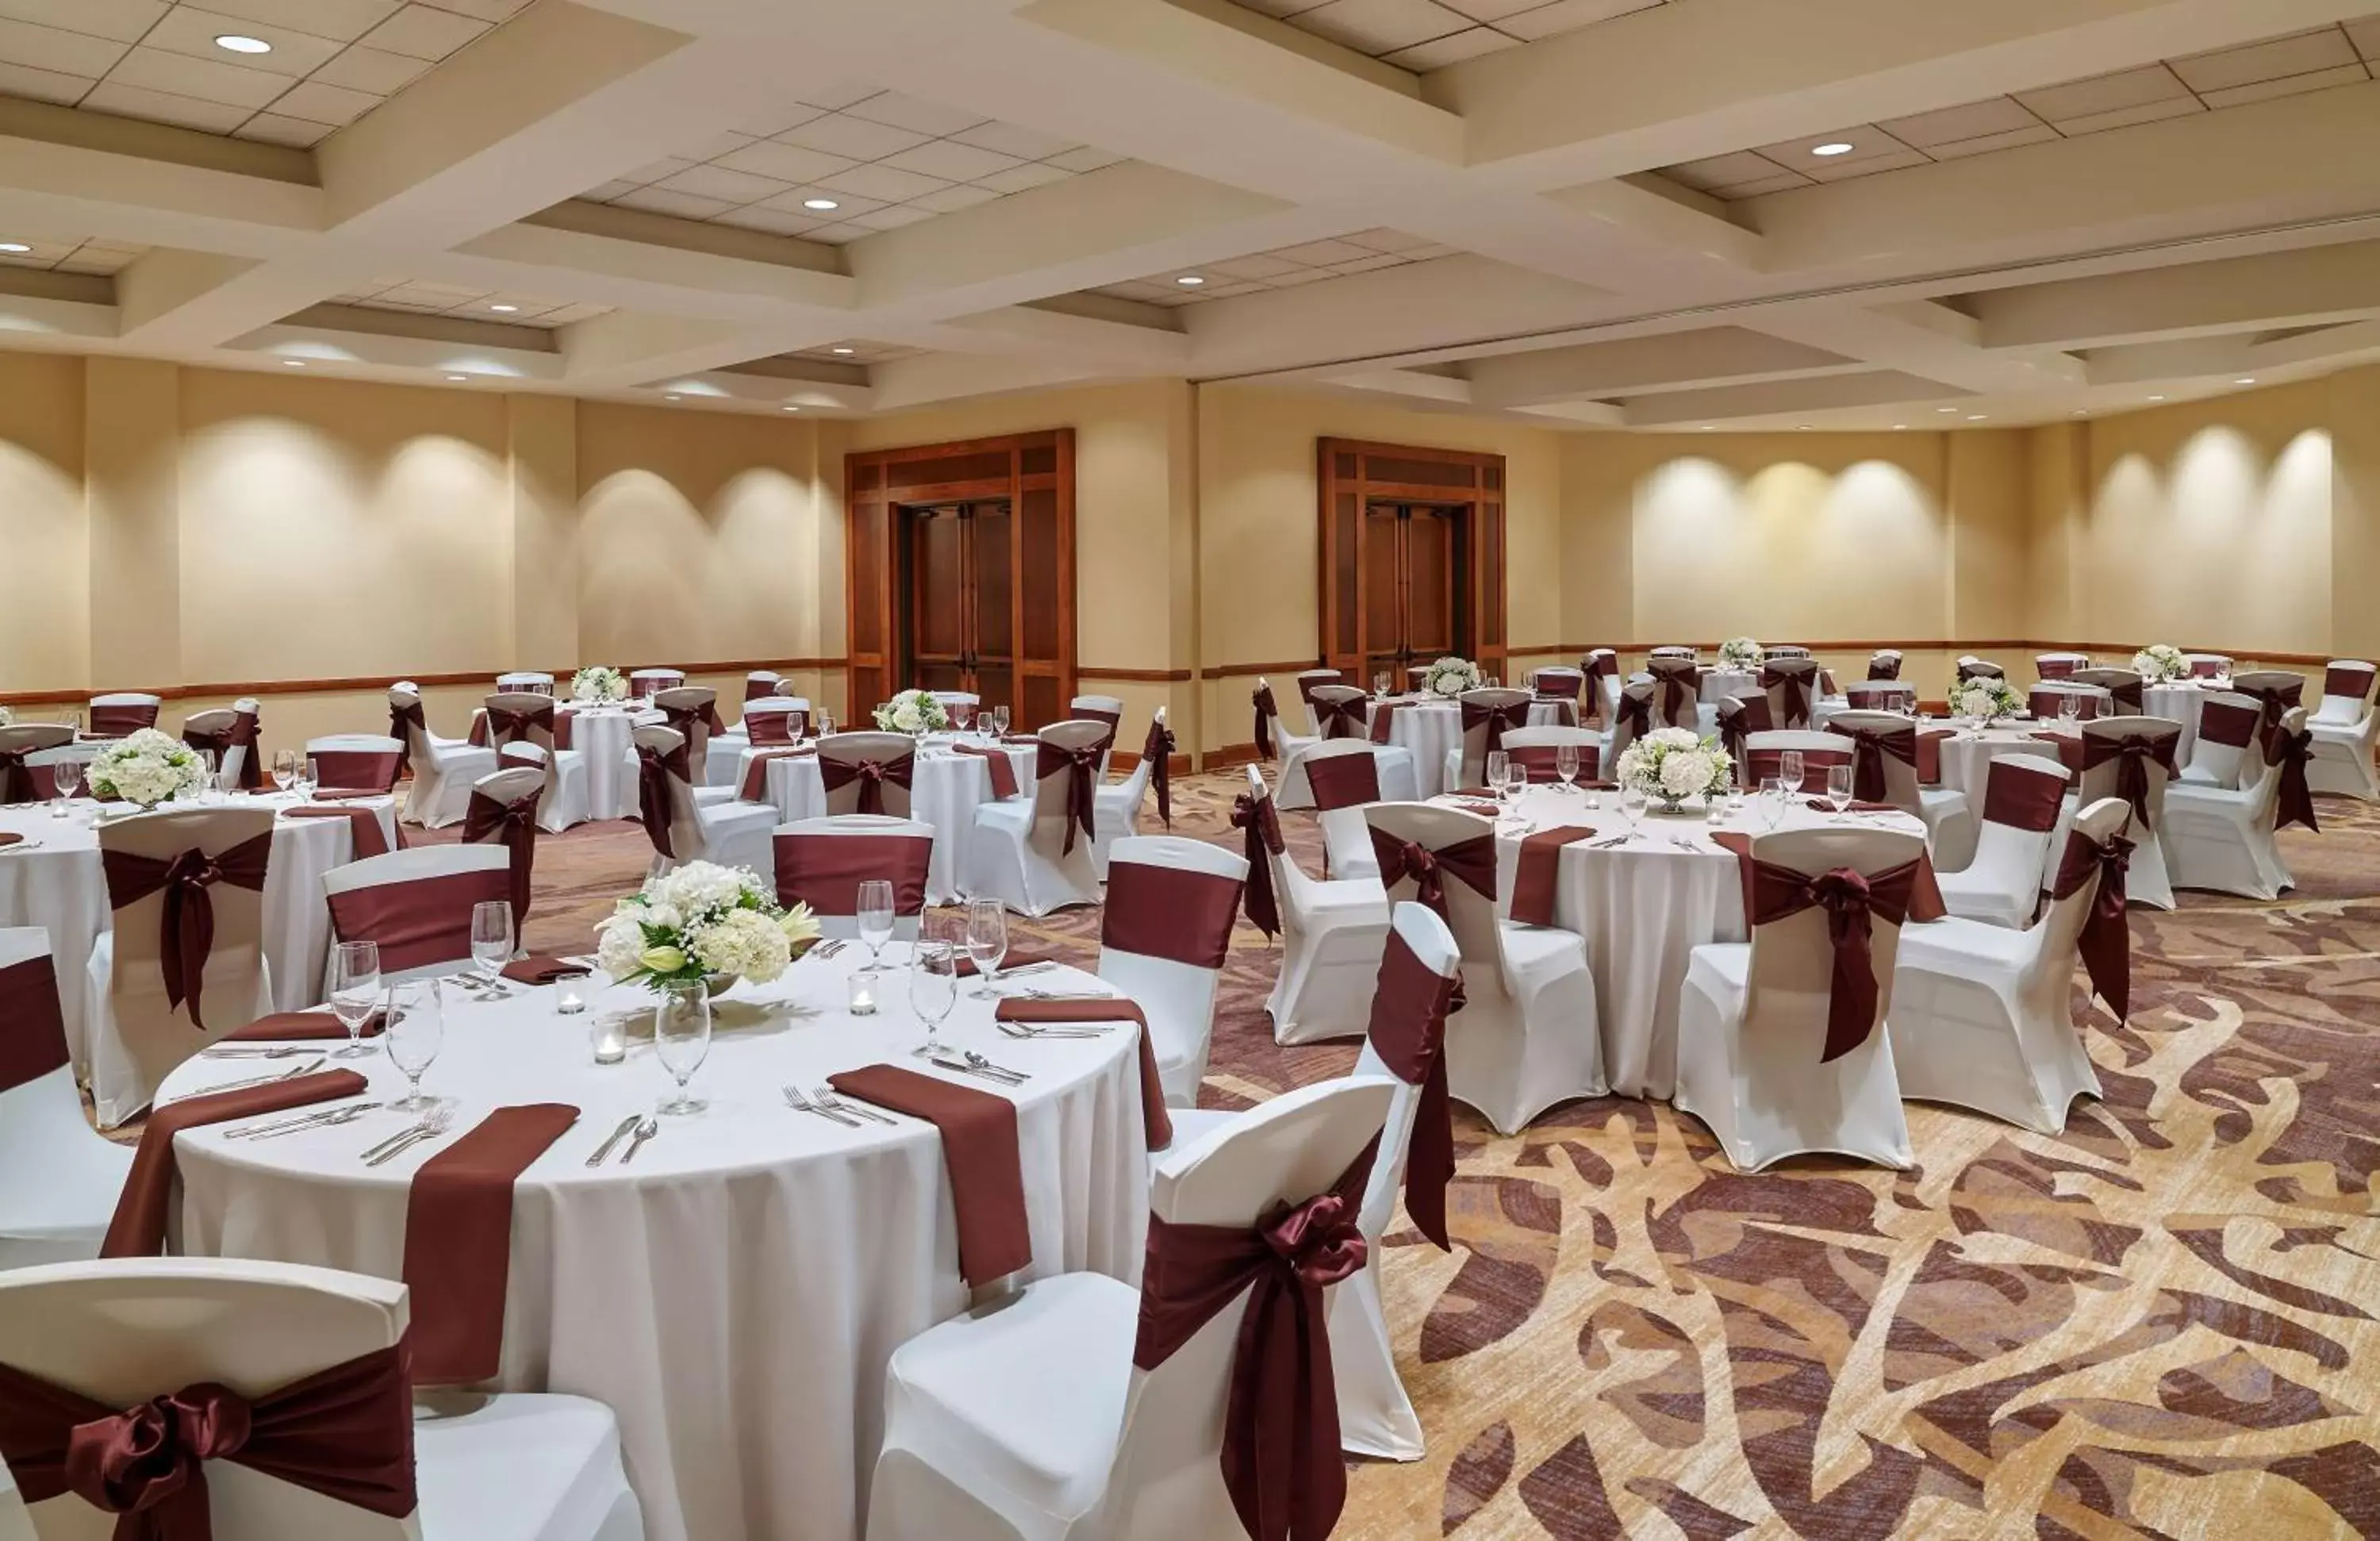 Meeting/conference room, Banquet Facilities in DoubleTree by Hilton San Antonio Airport